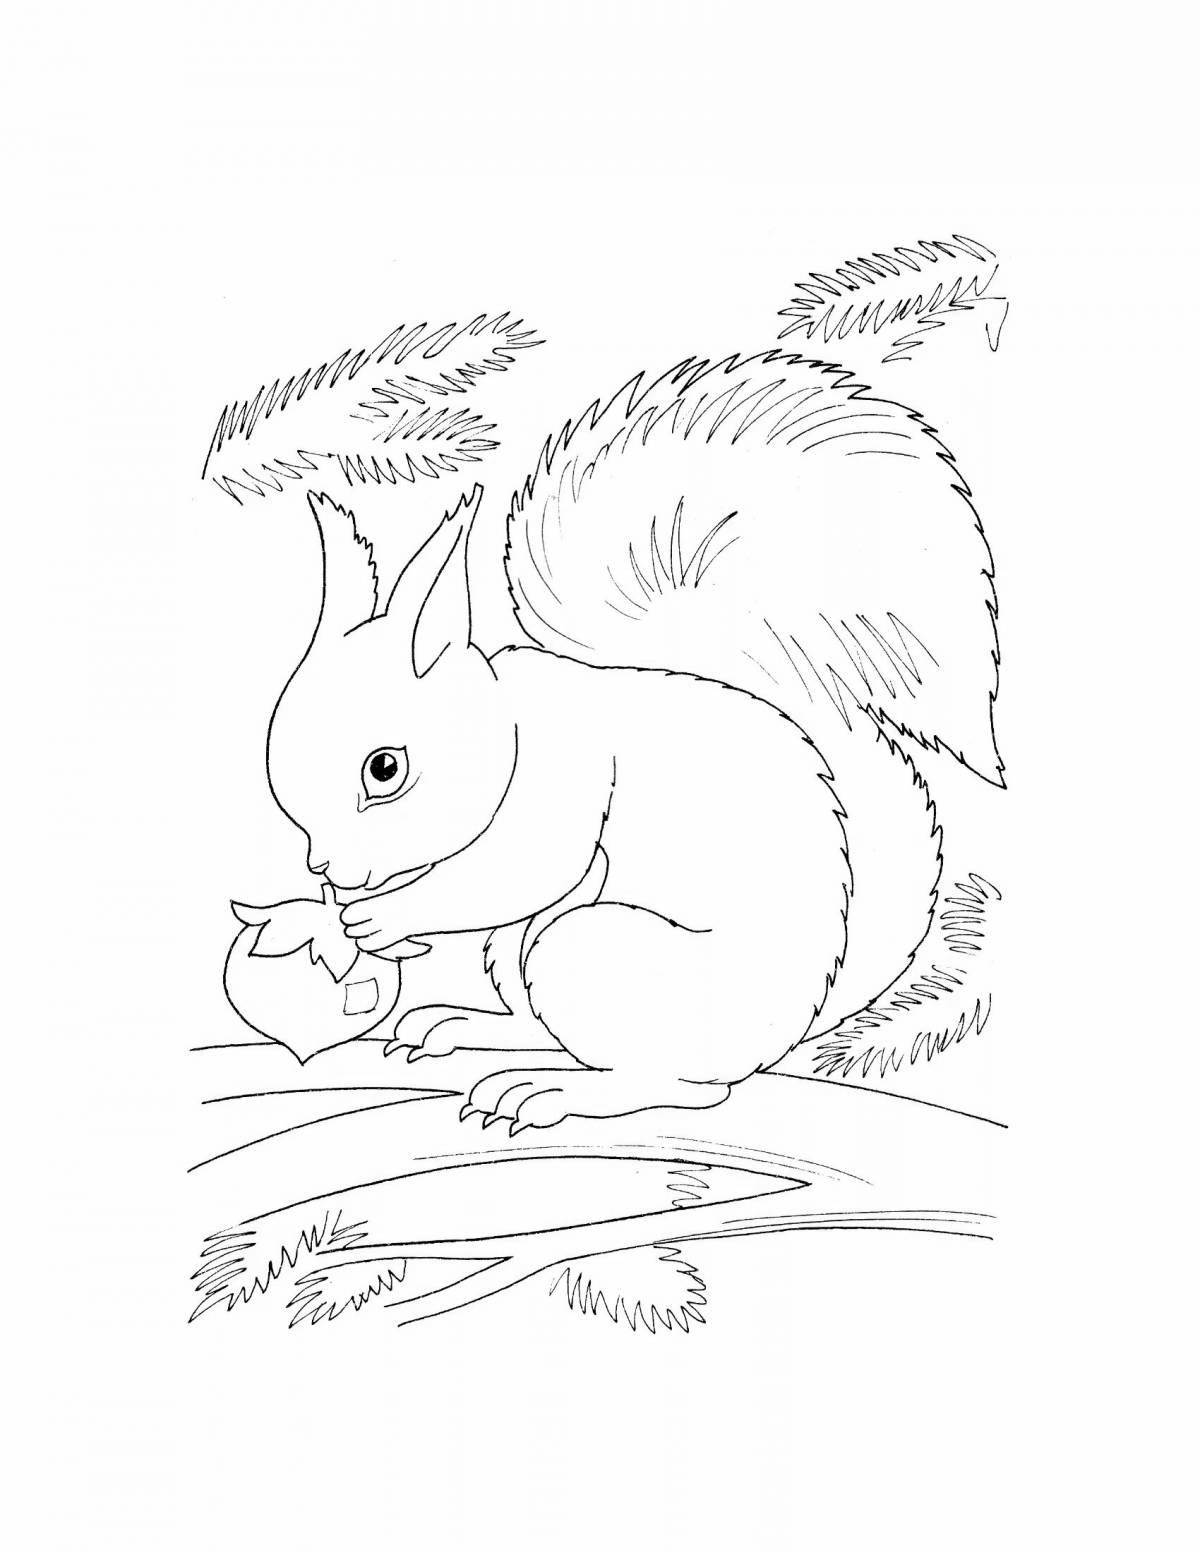 Fun coloring of a squirrel with a bump